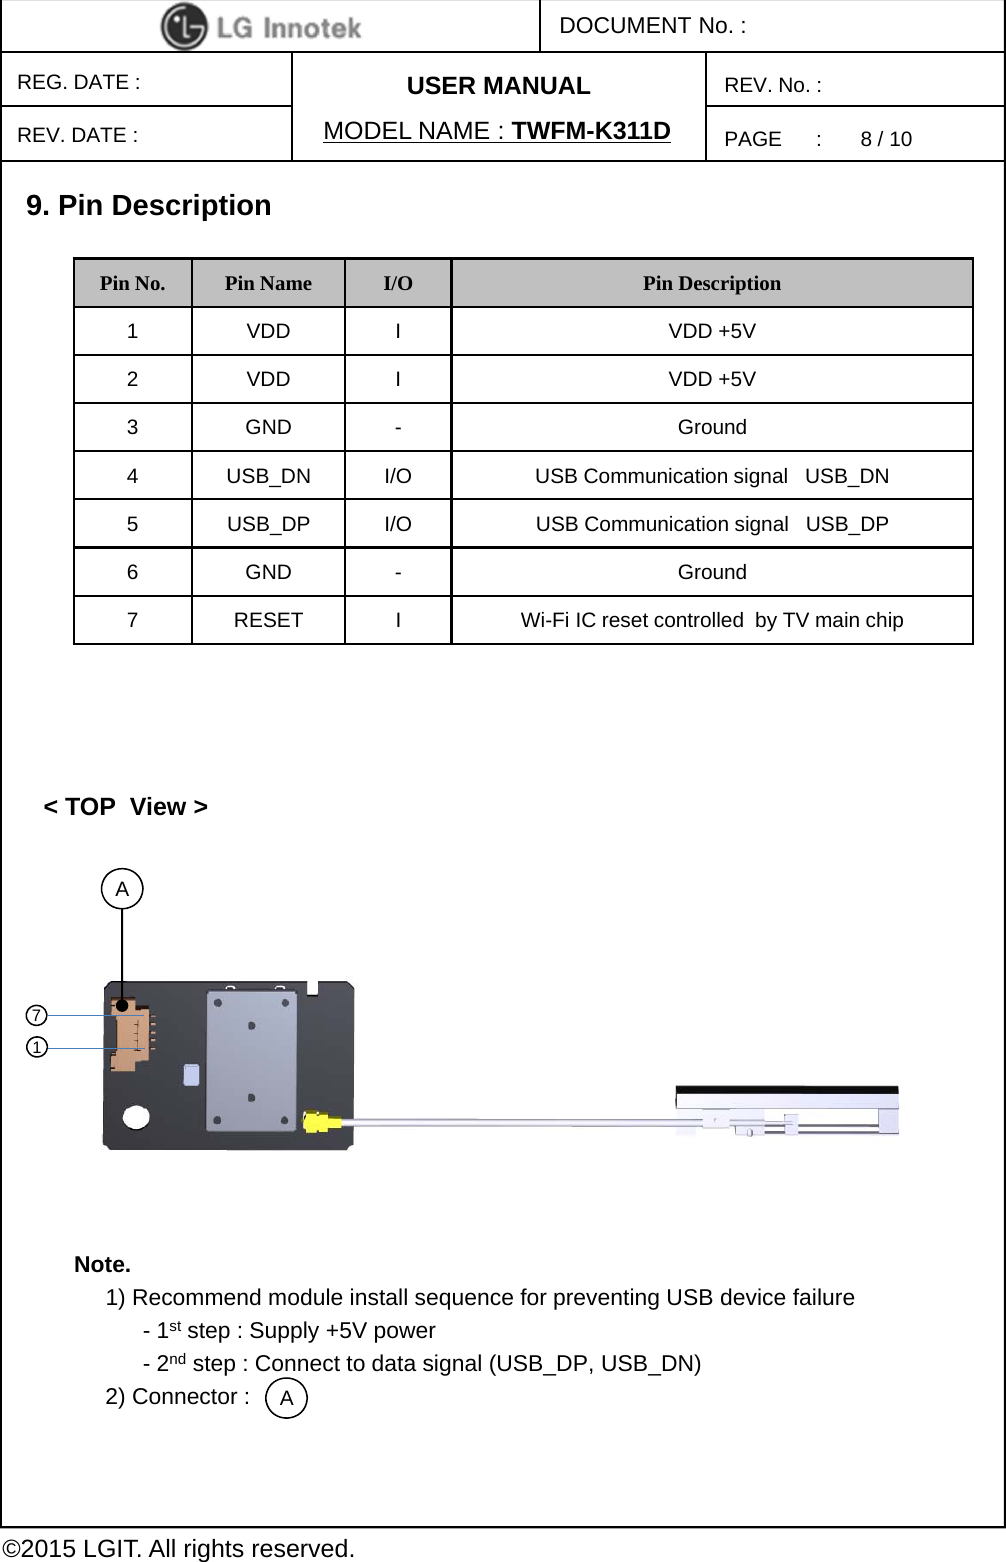 PAGE      :DOCUMENT No. :REG. DATE :MODEL NAME : TWFM-K311DREV. No. :©2015 LGIT. All rights reserved.REV. DATE :USER MANUAL9. Pin Description&lt; TOP  View &gt;Pin No. Pin Name I/O Pin Description1 VDD I VDD +5V2 VDD I VDD +5V3 GND - Ground4 USB_DN I/O USB Communication signal   USB_DN5 USB_DP I/O USB Communication signal   USB_DP6 GND - Ground7 RESET I Wi-Fi IC reset controlled  by TV main chipA17Note.1) Recommend module install sequence for preventing USB device failure-1st step : Supply +5V power -2nd step : Connect to data signal (USB_DP, USB_DN)2) Connector : A8 / 10